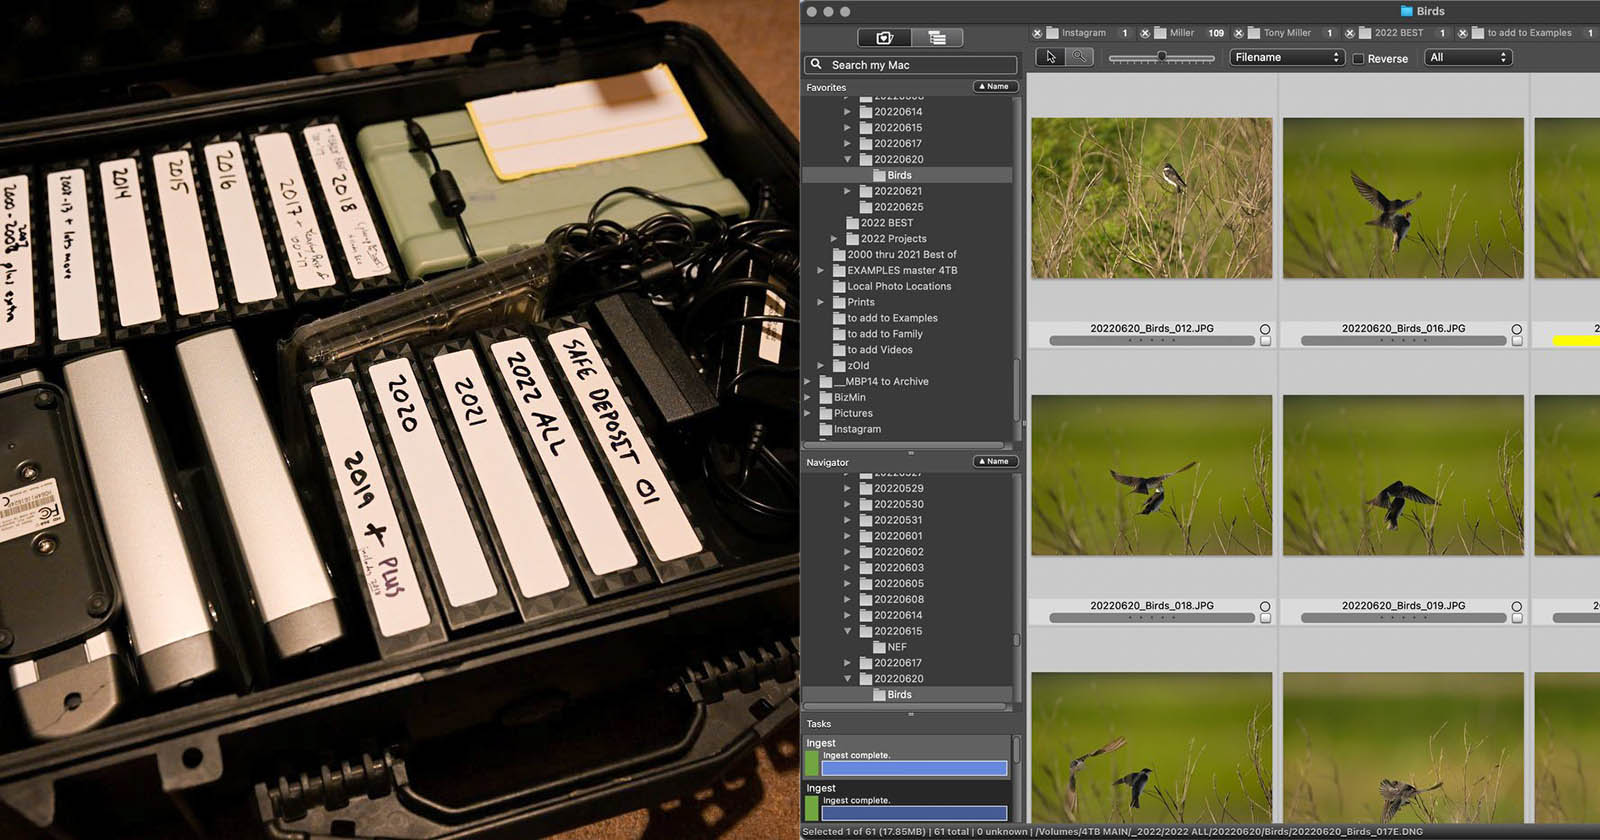 How to Turbocharge Your Photography Workflow | PetaPixel